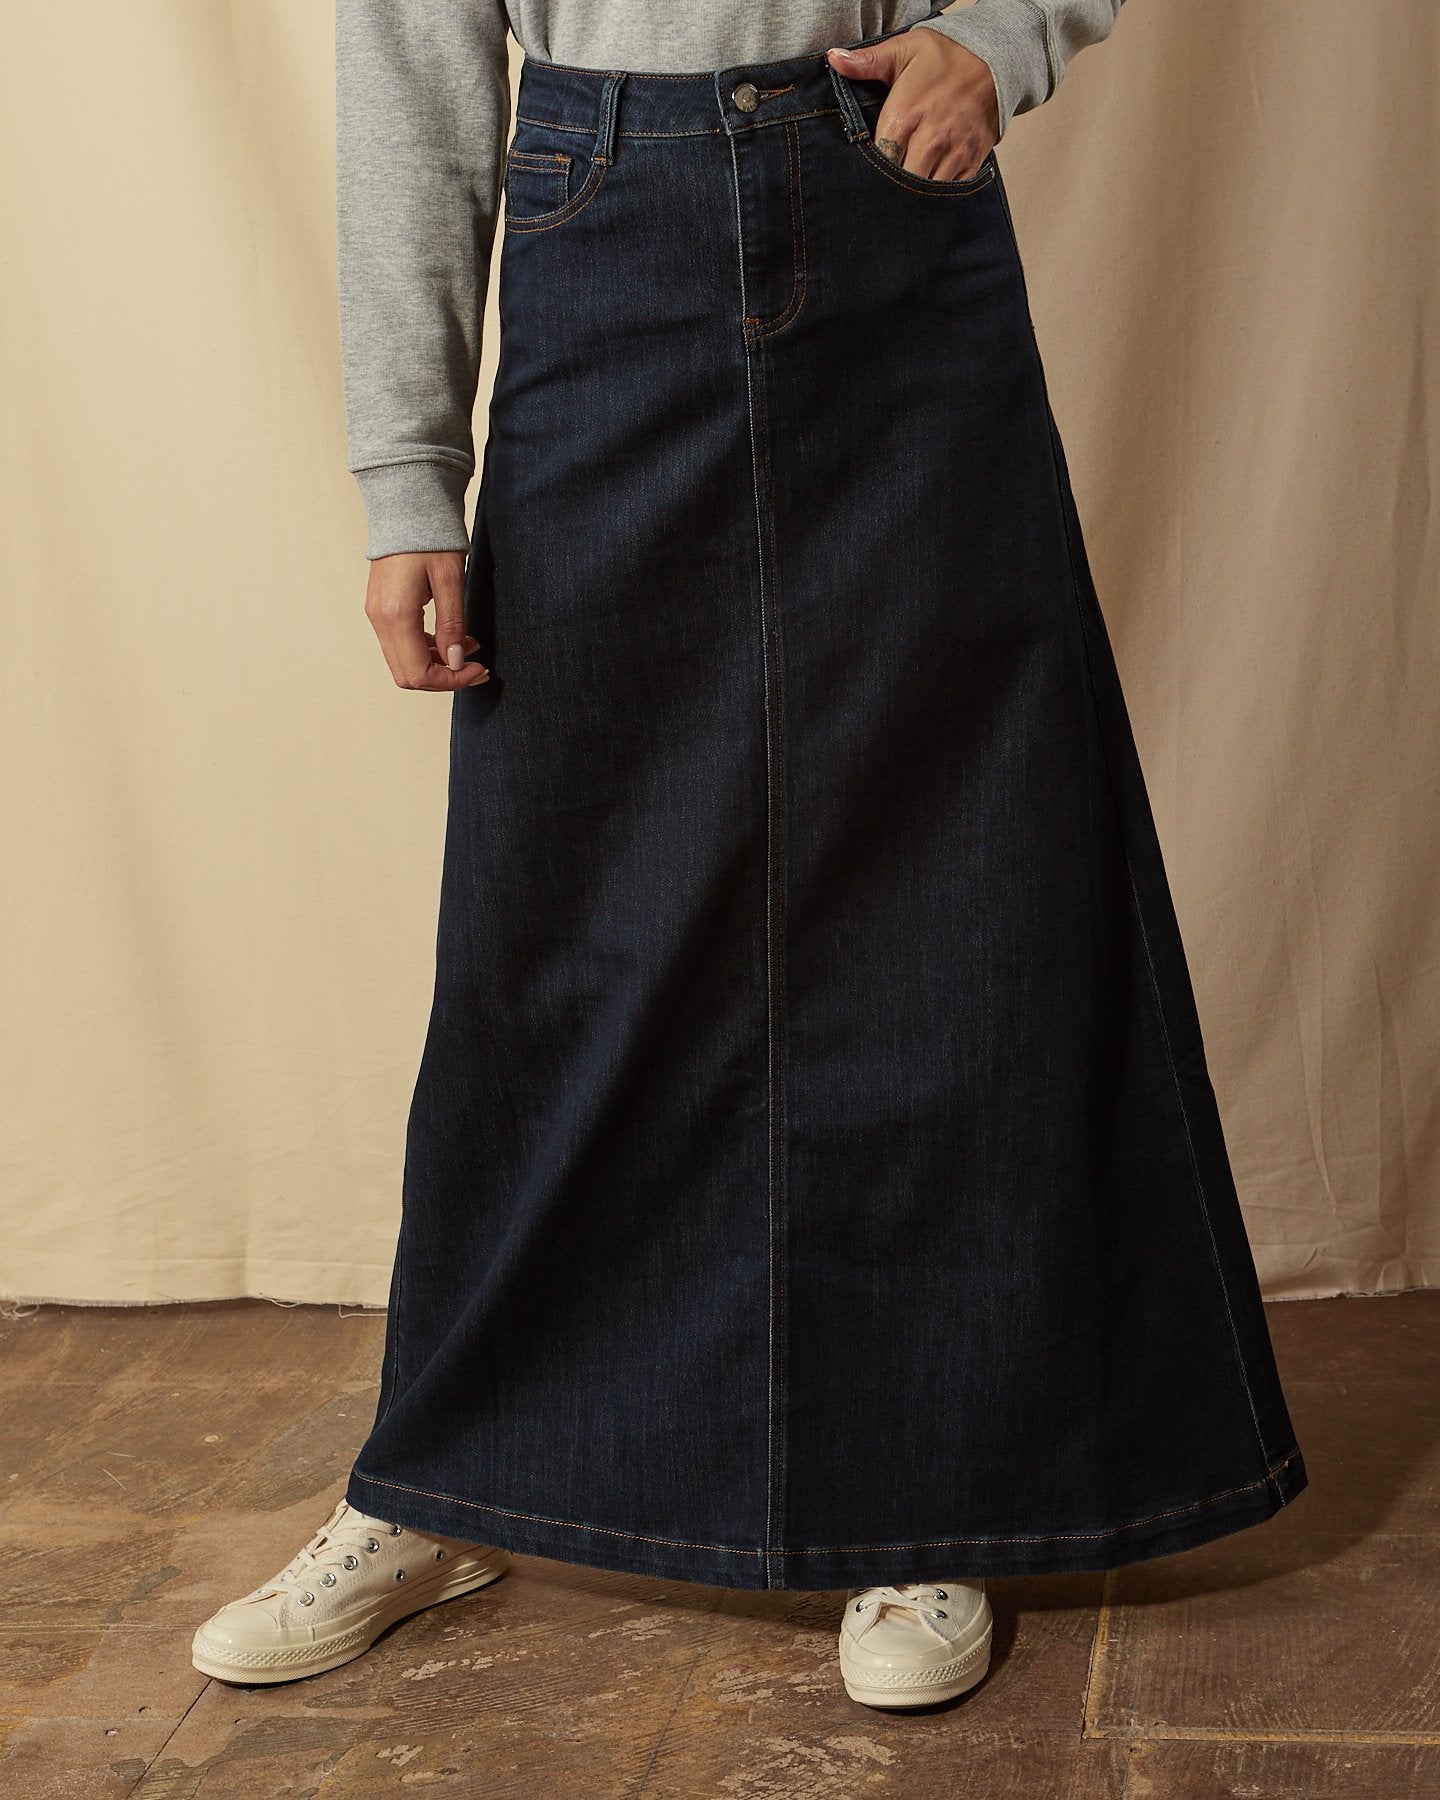 Close-up front view of dark blue flared style denim skirt with focus on front pockets, belt loops and button closure.